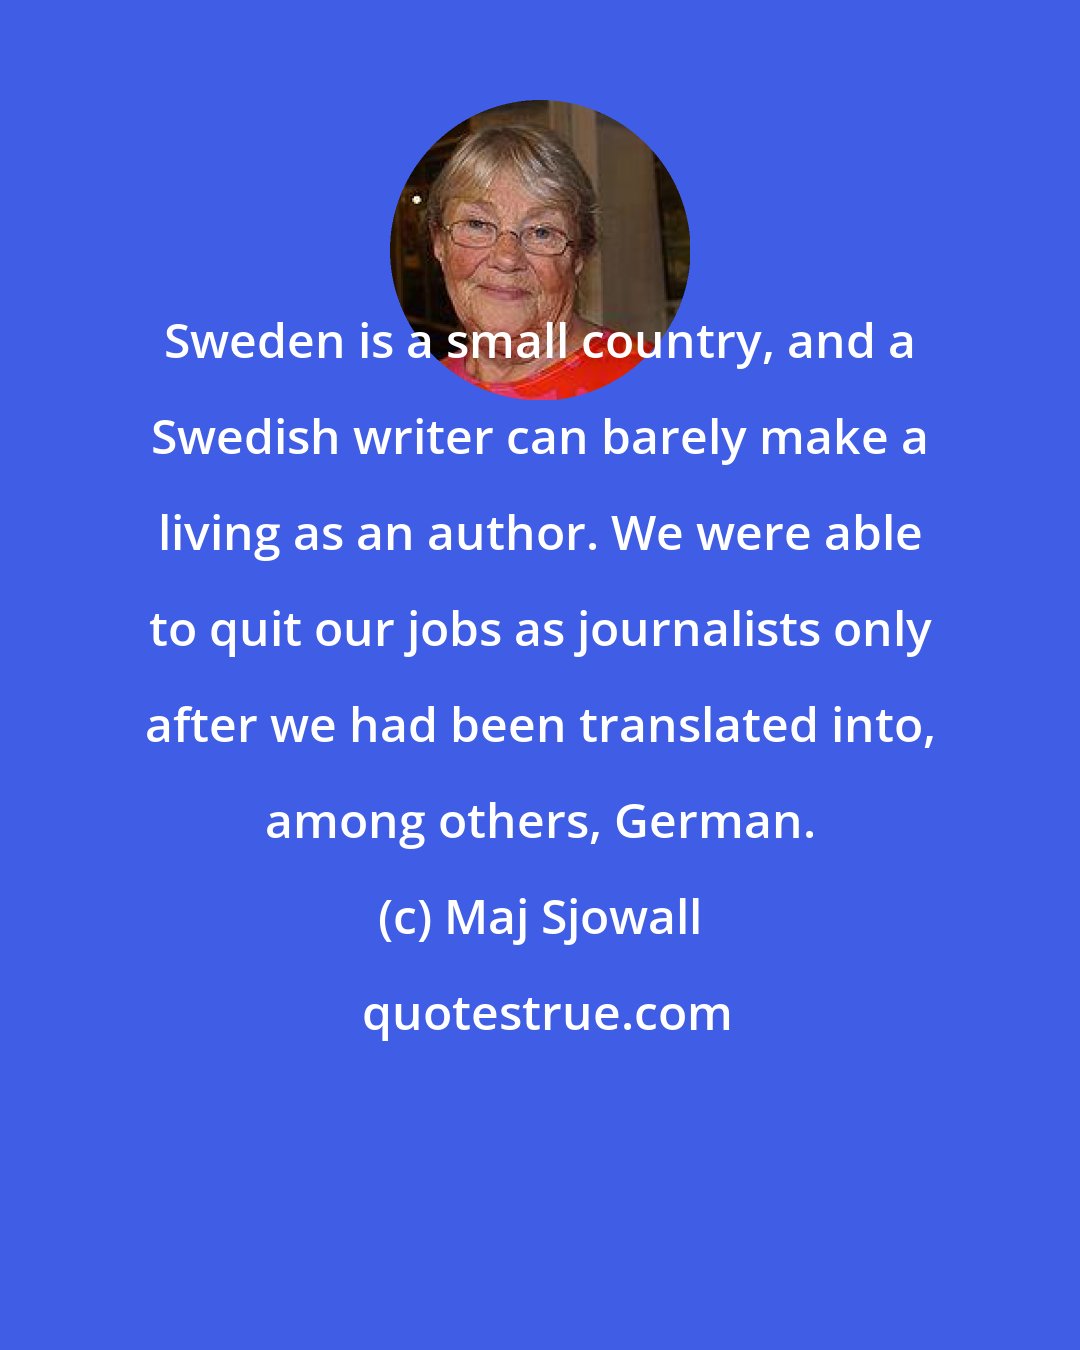 Maj Sjowall: Sweden is a small country, and a Swedish writer can barely make a living as an author. We were able to quit our jobs as journalists only after we had been translated into, among others, German.